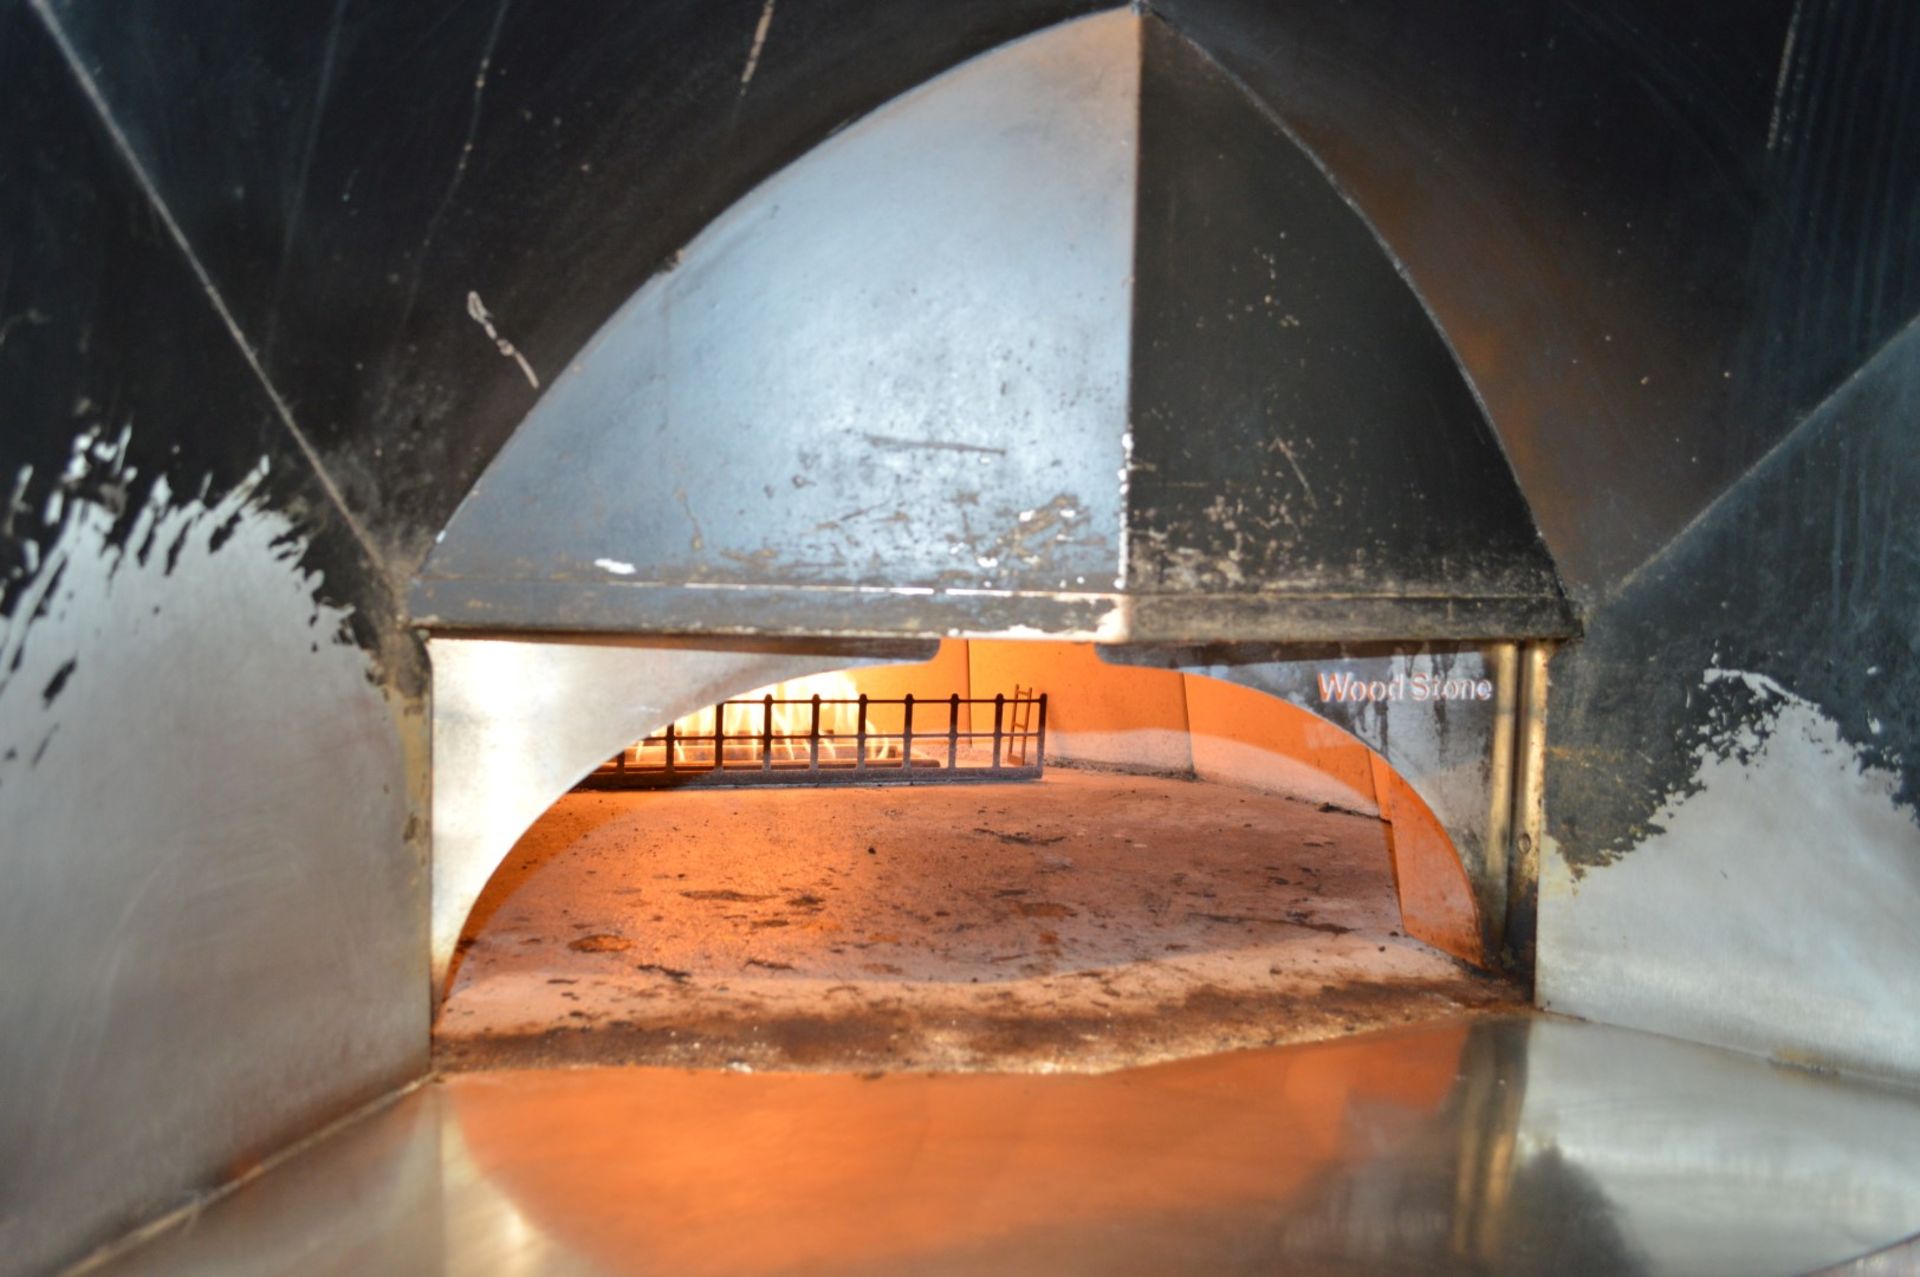 1 x Wood Stone Commercial Gas Fired Pizza Oven - CL357 - Location: Bolton BL6 This lot will incur - Image 2 of 6